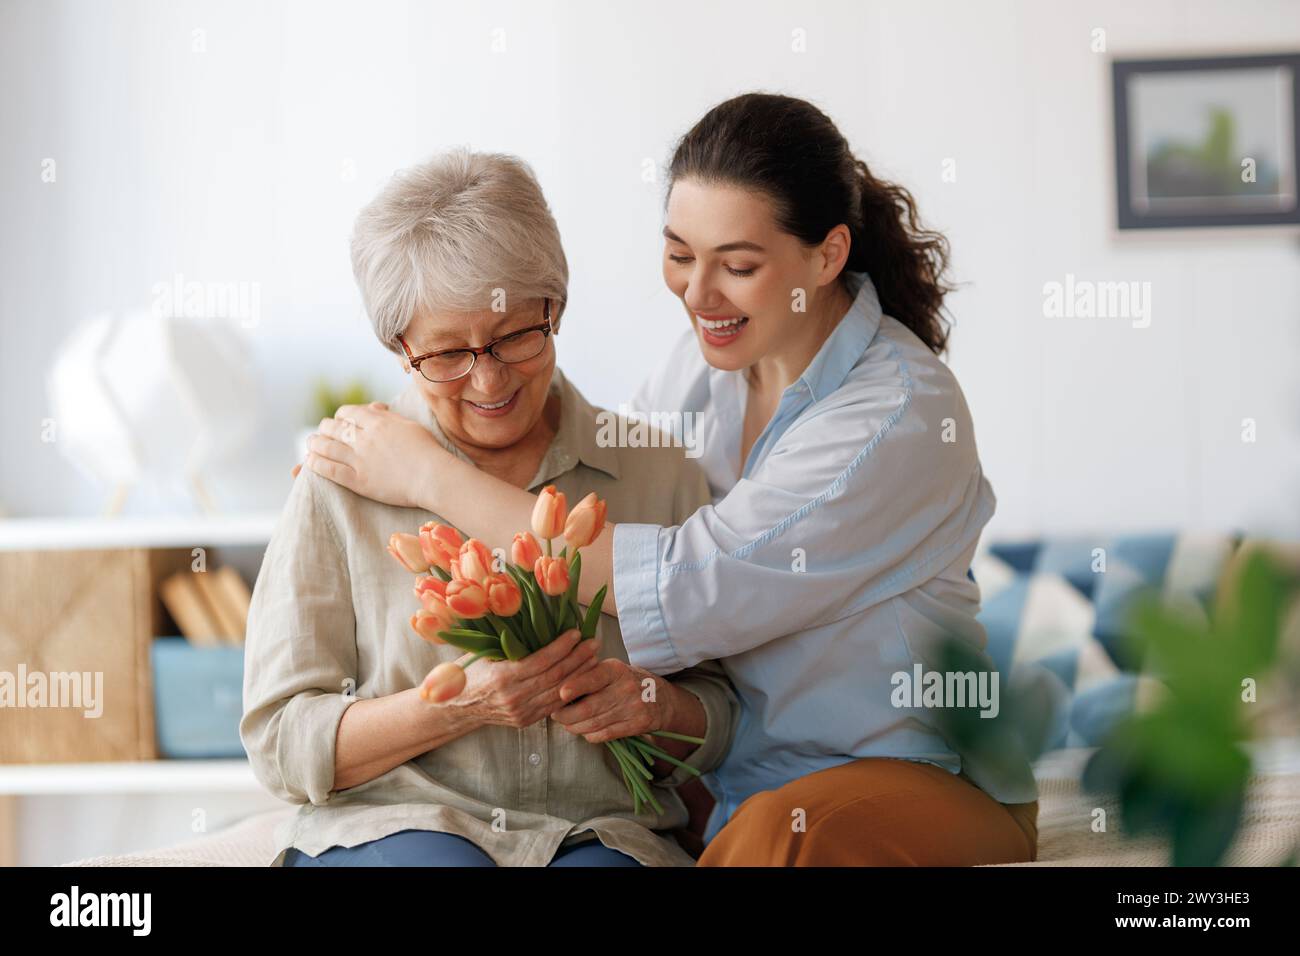 Beautiful young woman and her mother with flowers tulips in hands at home. Stock Photo